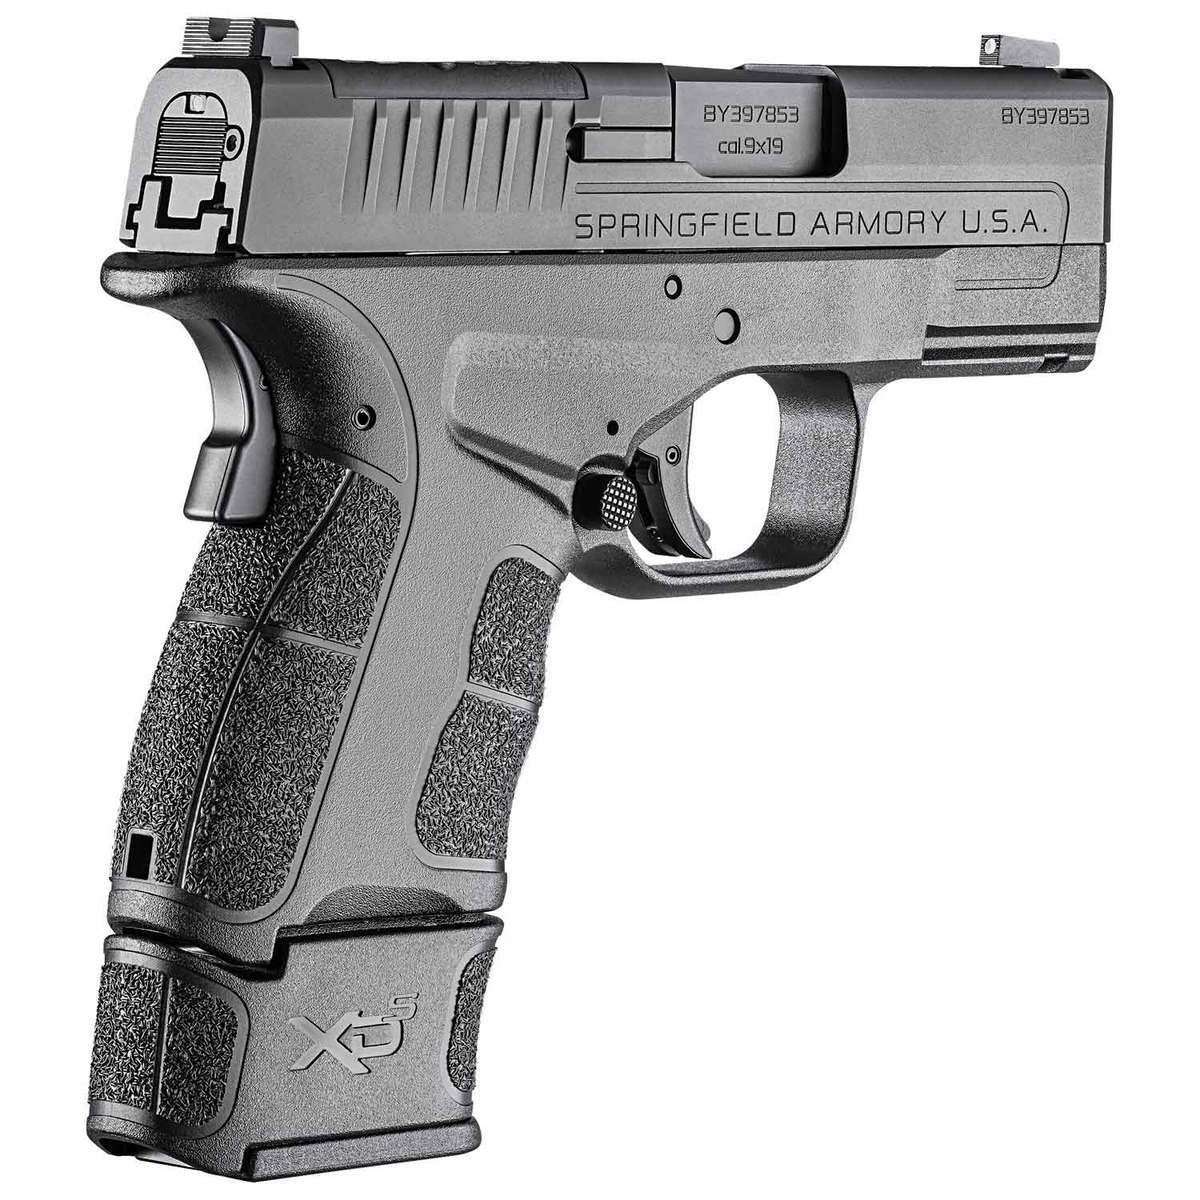 springfield-armory-xd-s-mod-2-osp-9mm-luger-3-3in-black-pistol-9-1-rounds-sportsman-s-warehouse